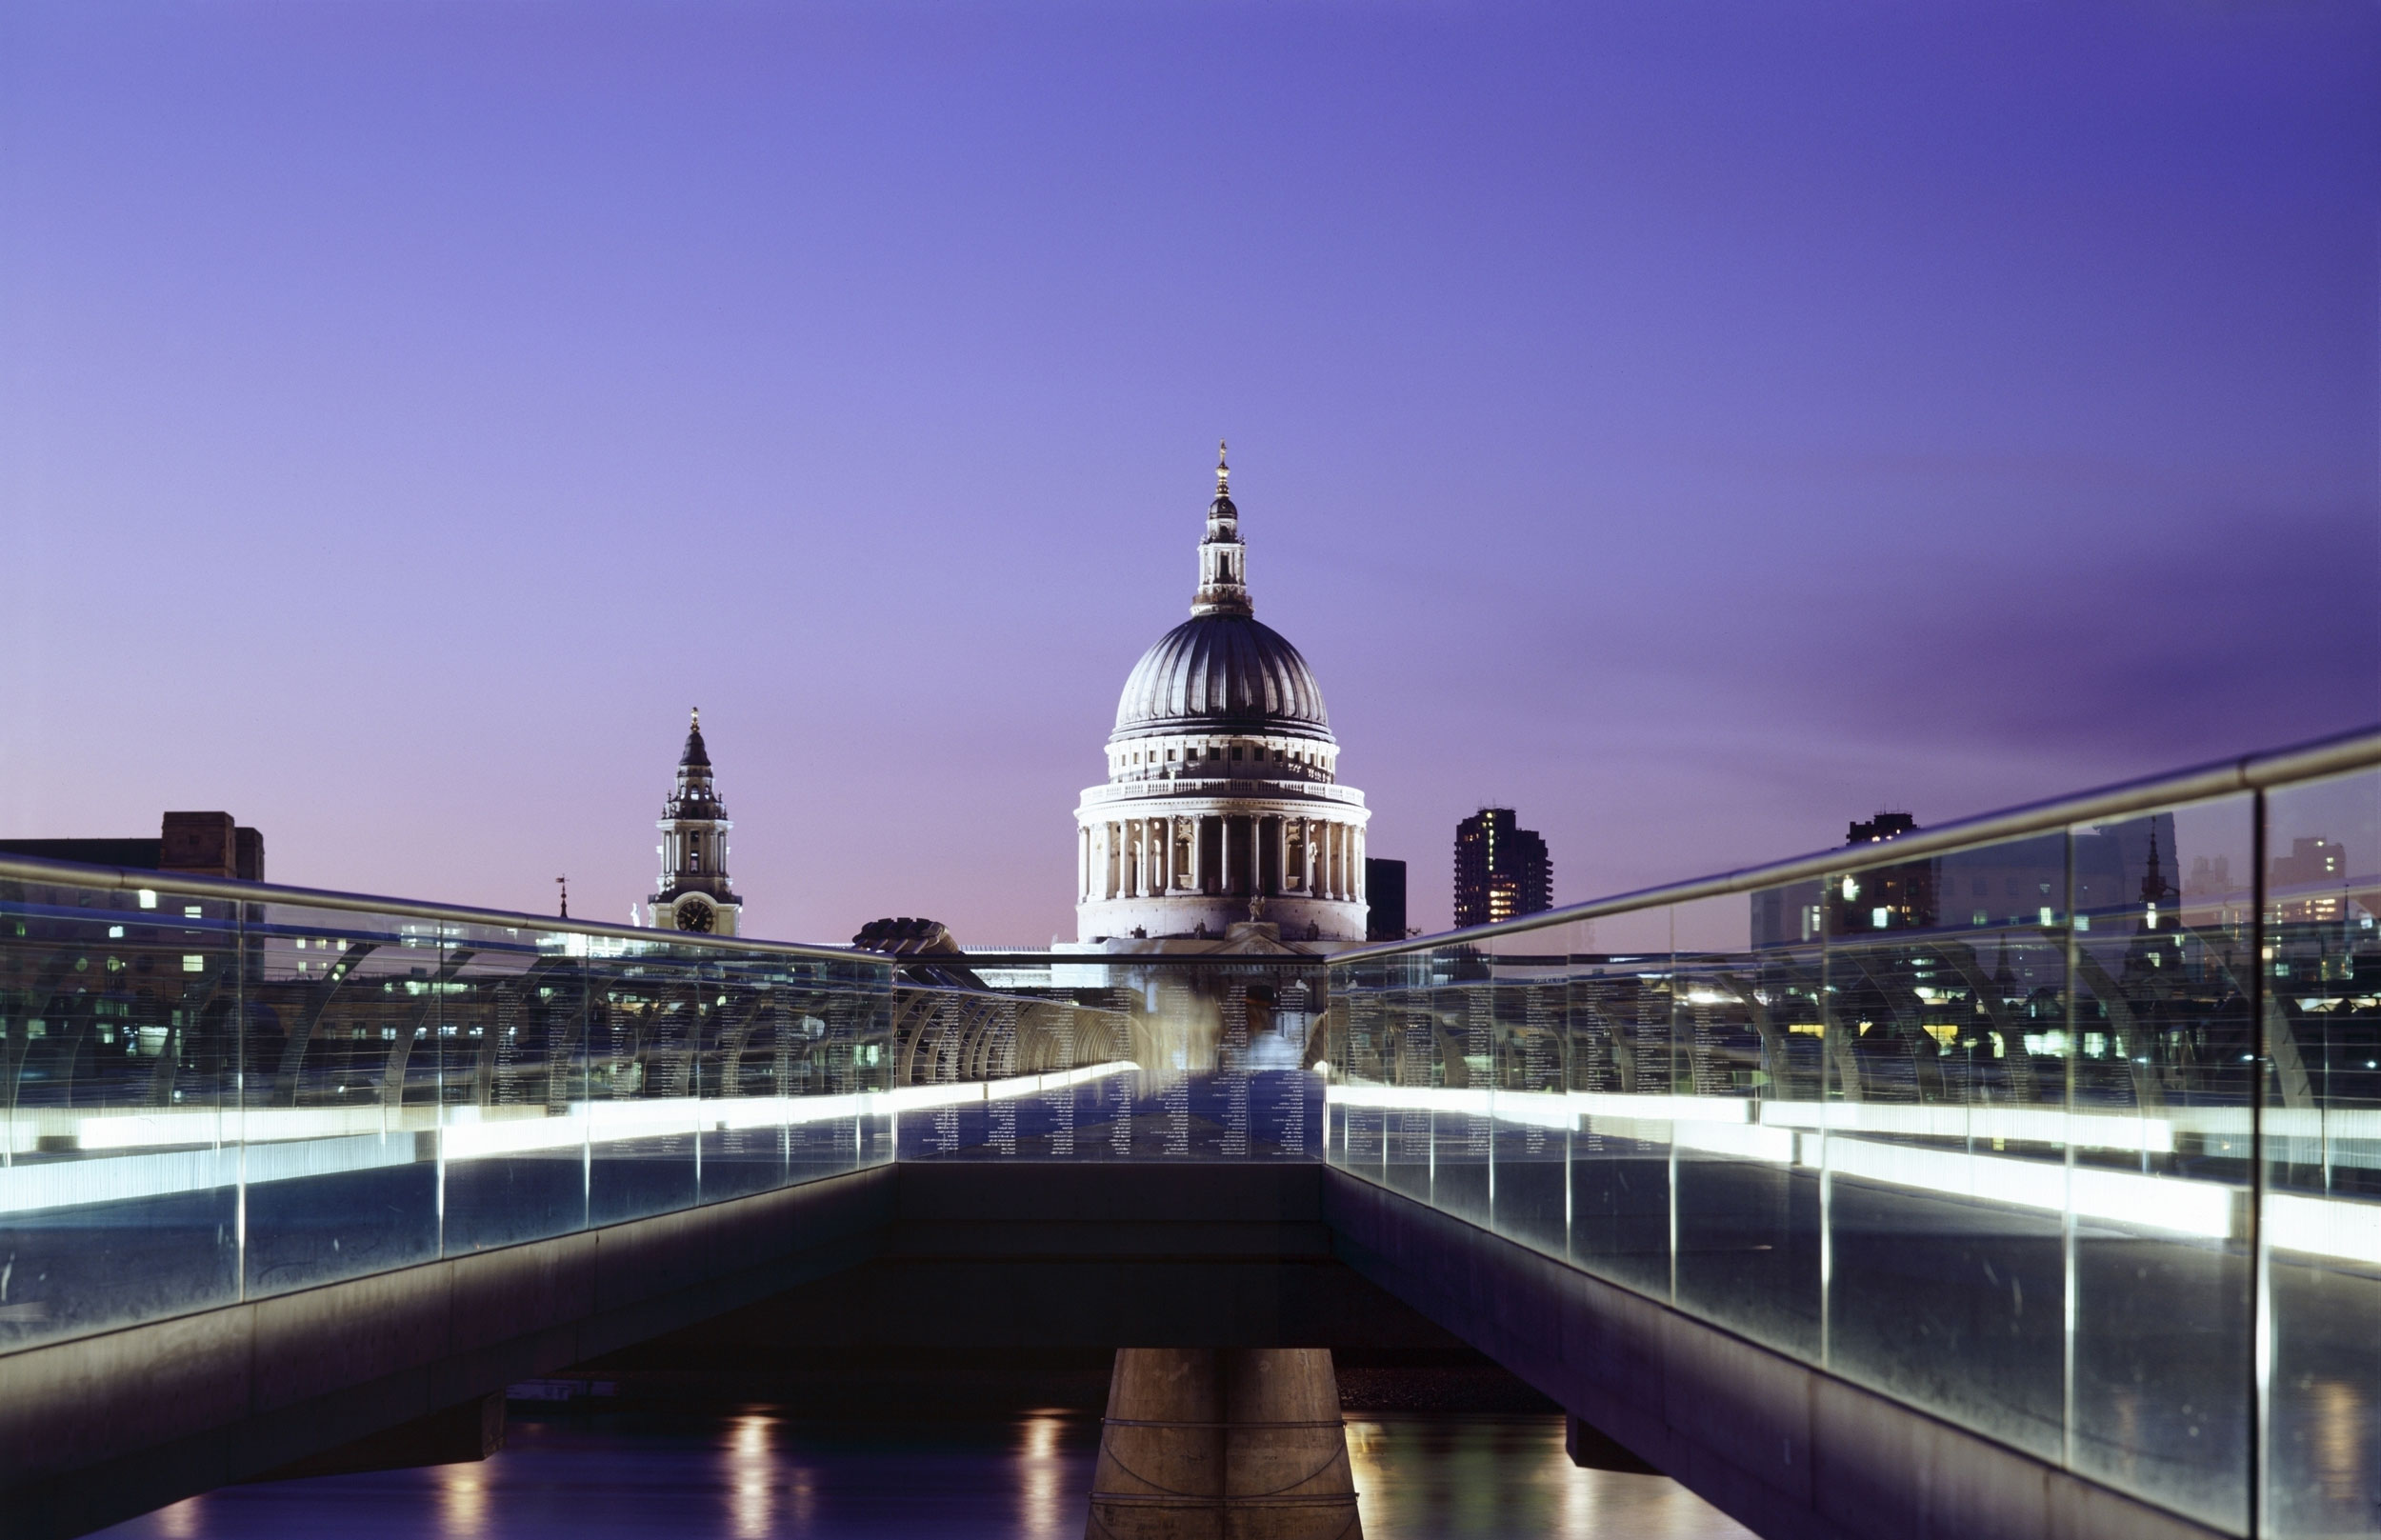 St Paul's cathedral at night, viewed across the London Millenium Footbridge.